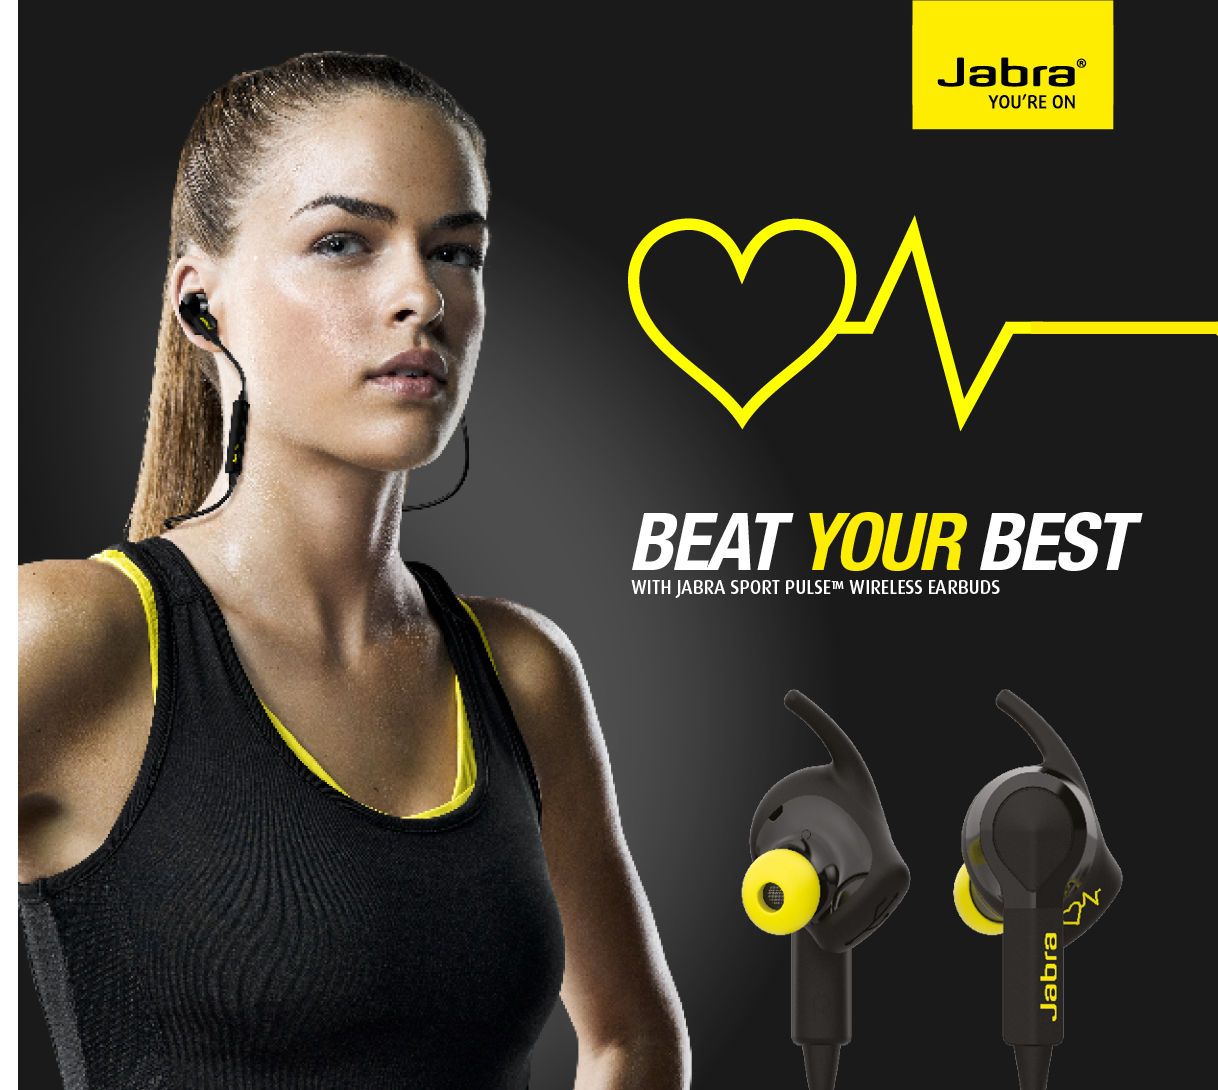 Jabal earphone oxygen monitoring for patient health monitoring